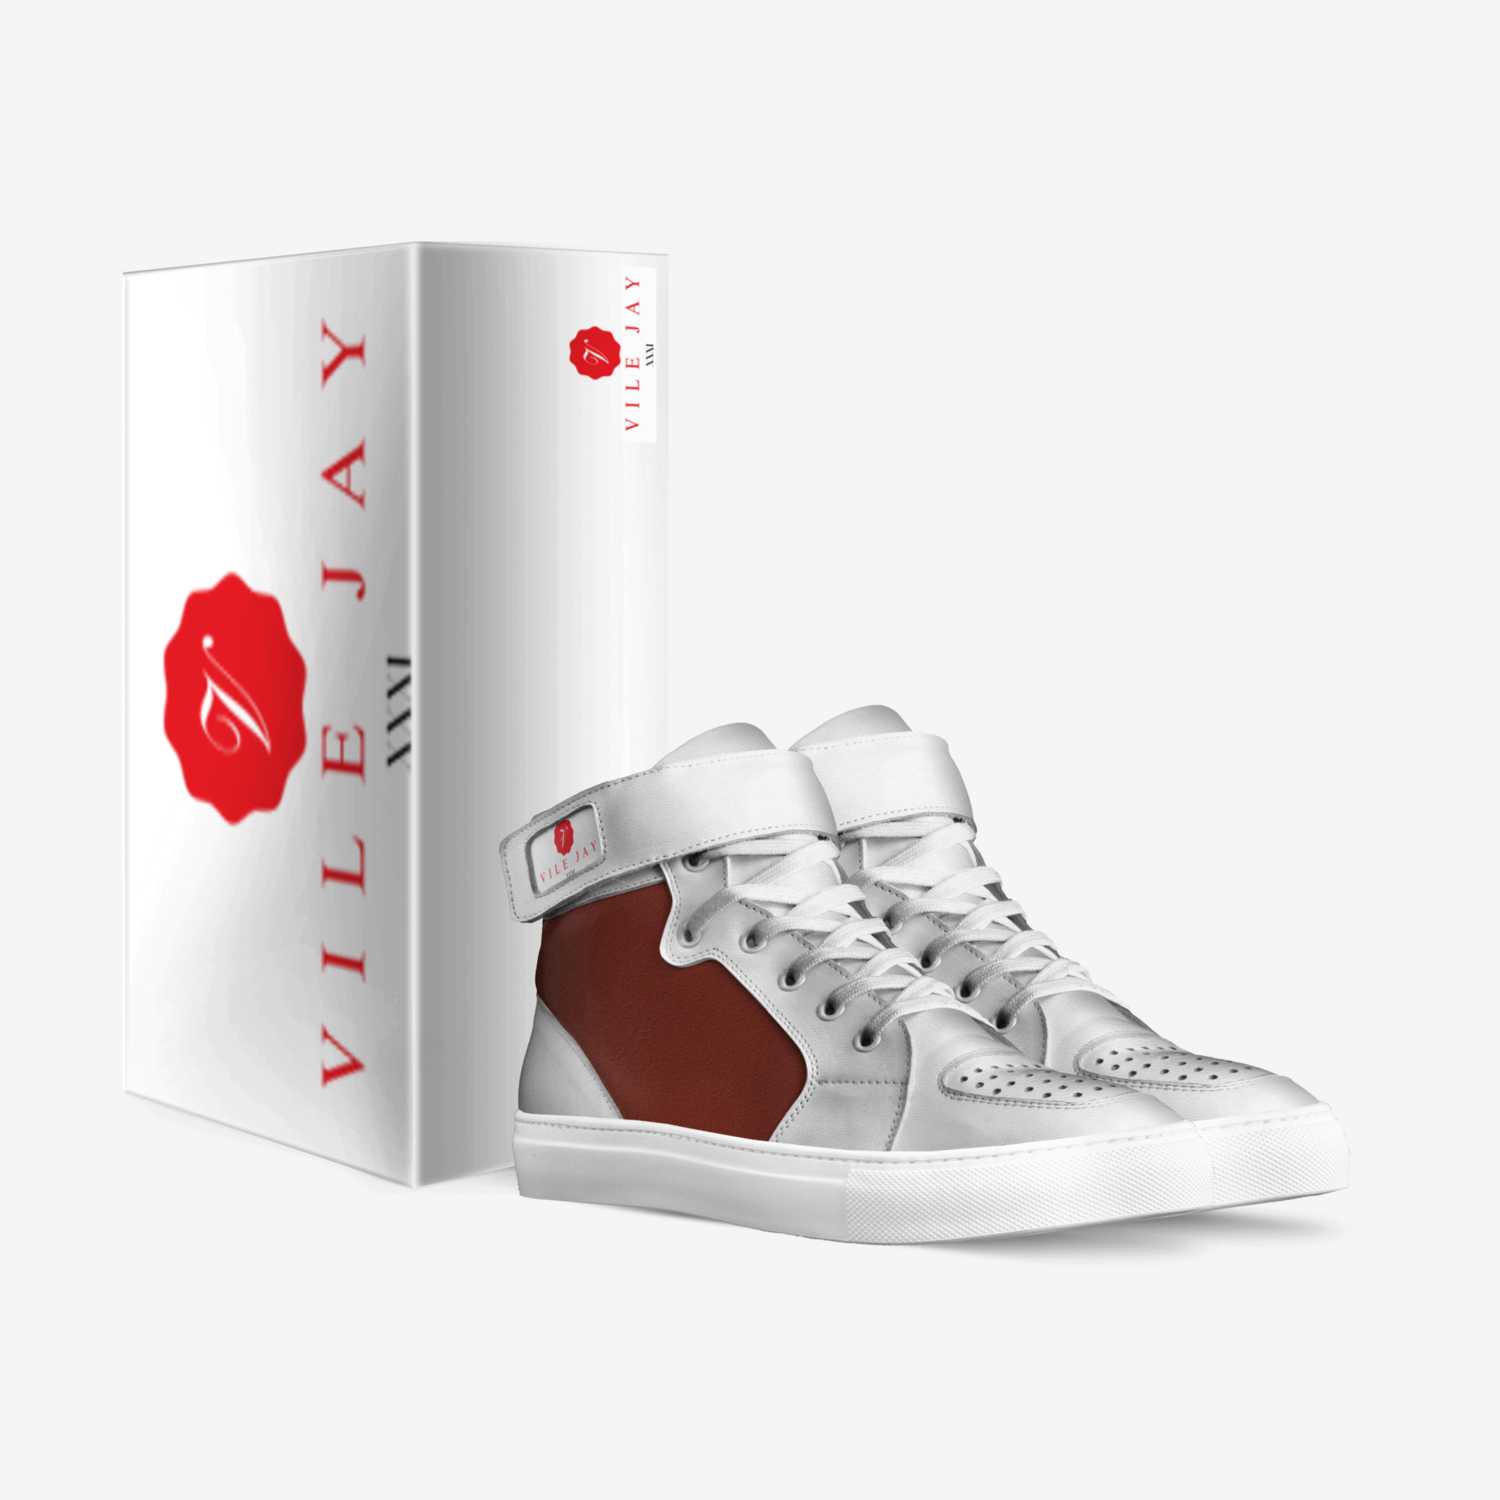 Vile Jay XXXI custom made in Italy shoes by Kim Chimido | Box view